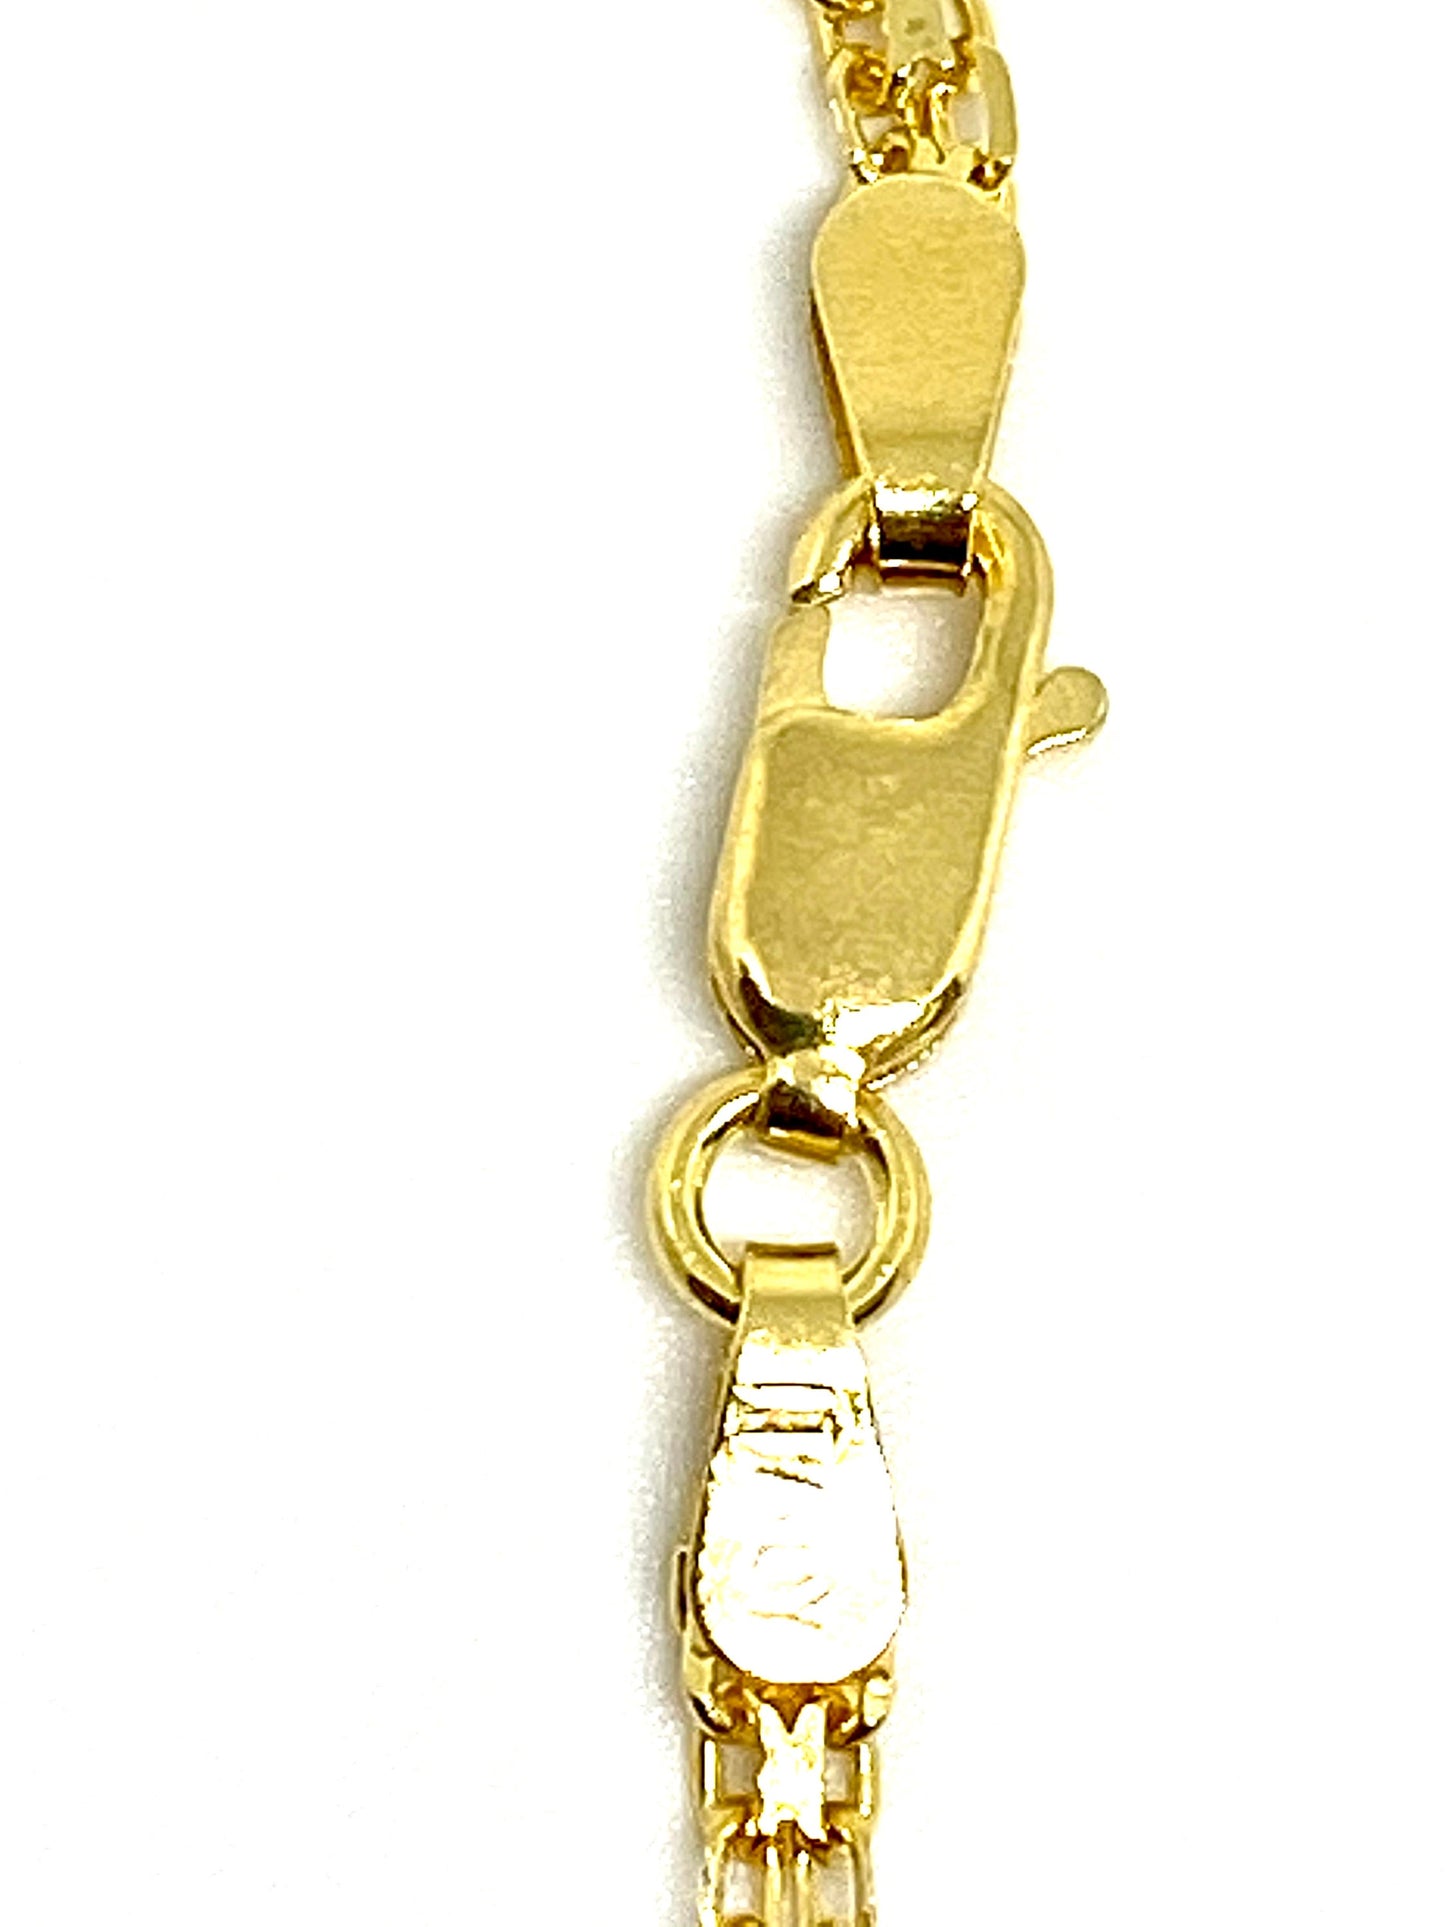 Yellow Gold Over Sterling Silver Bismark Link Chain Necklace